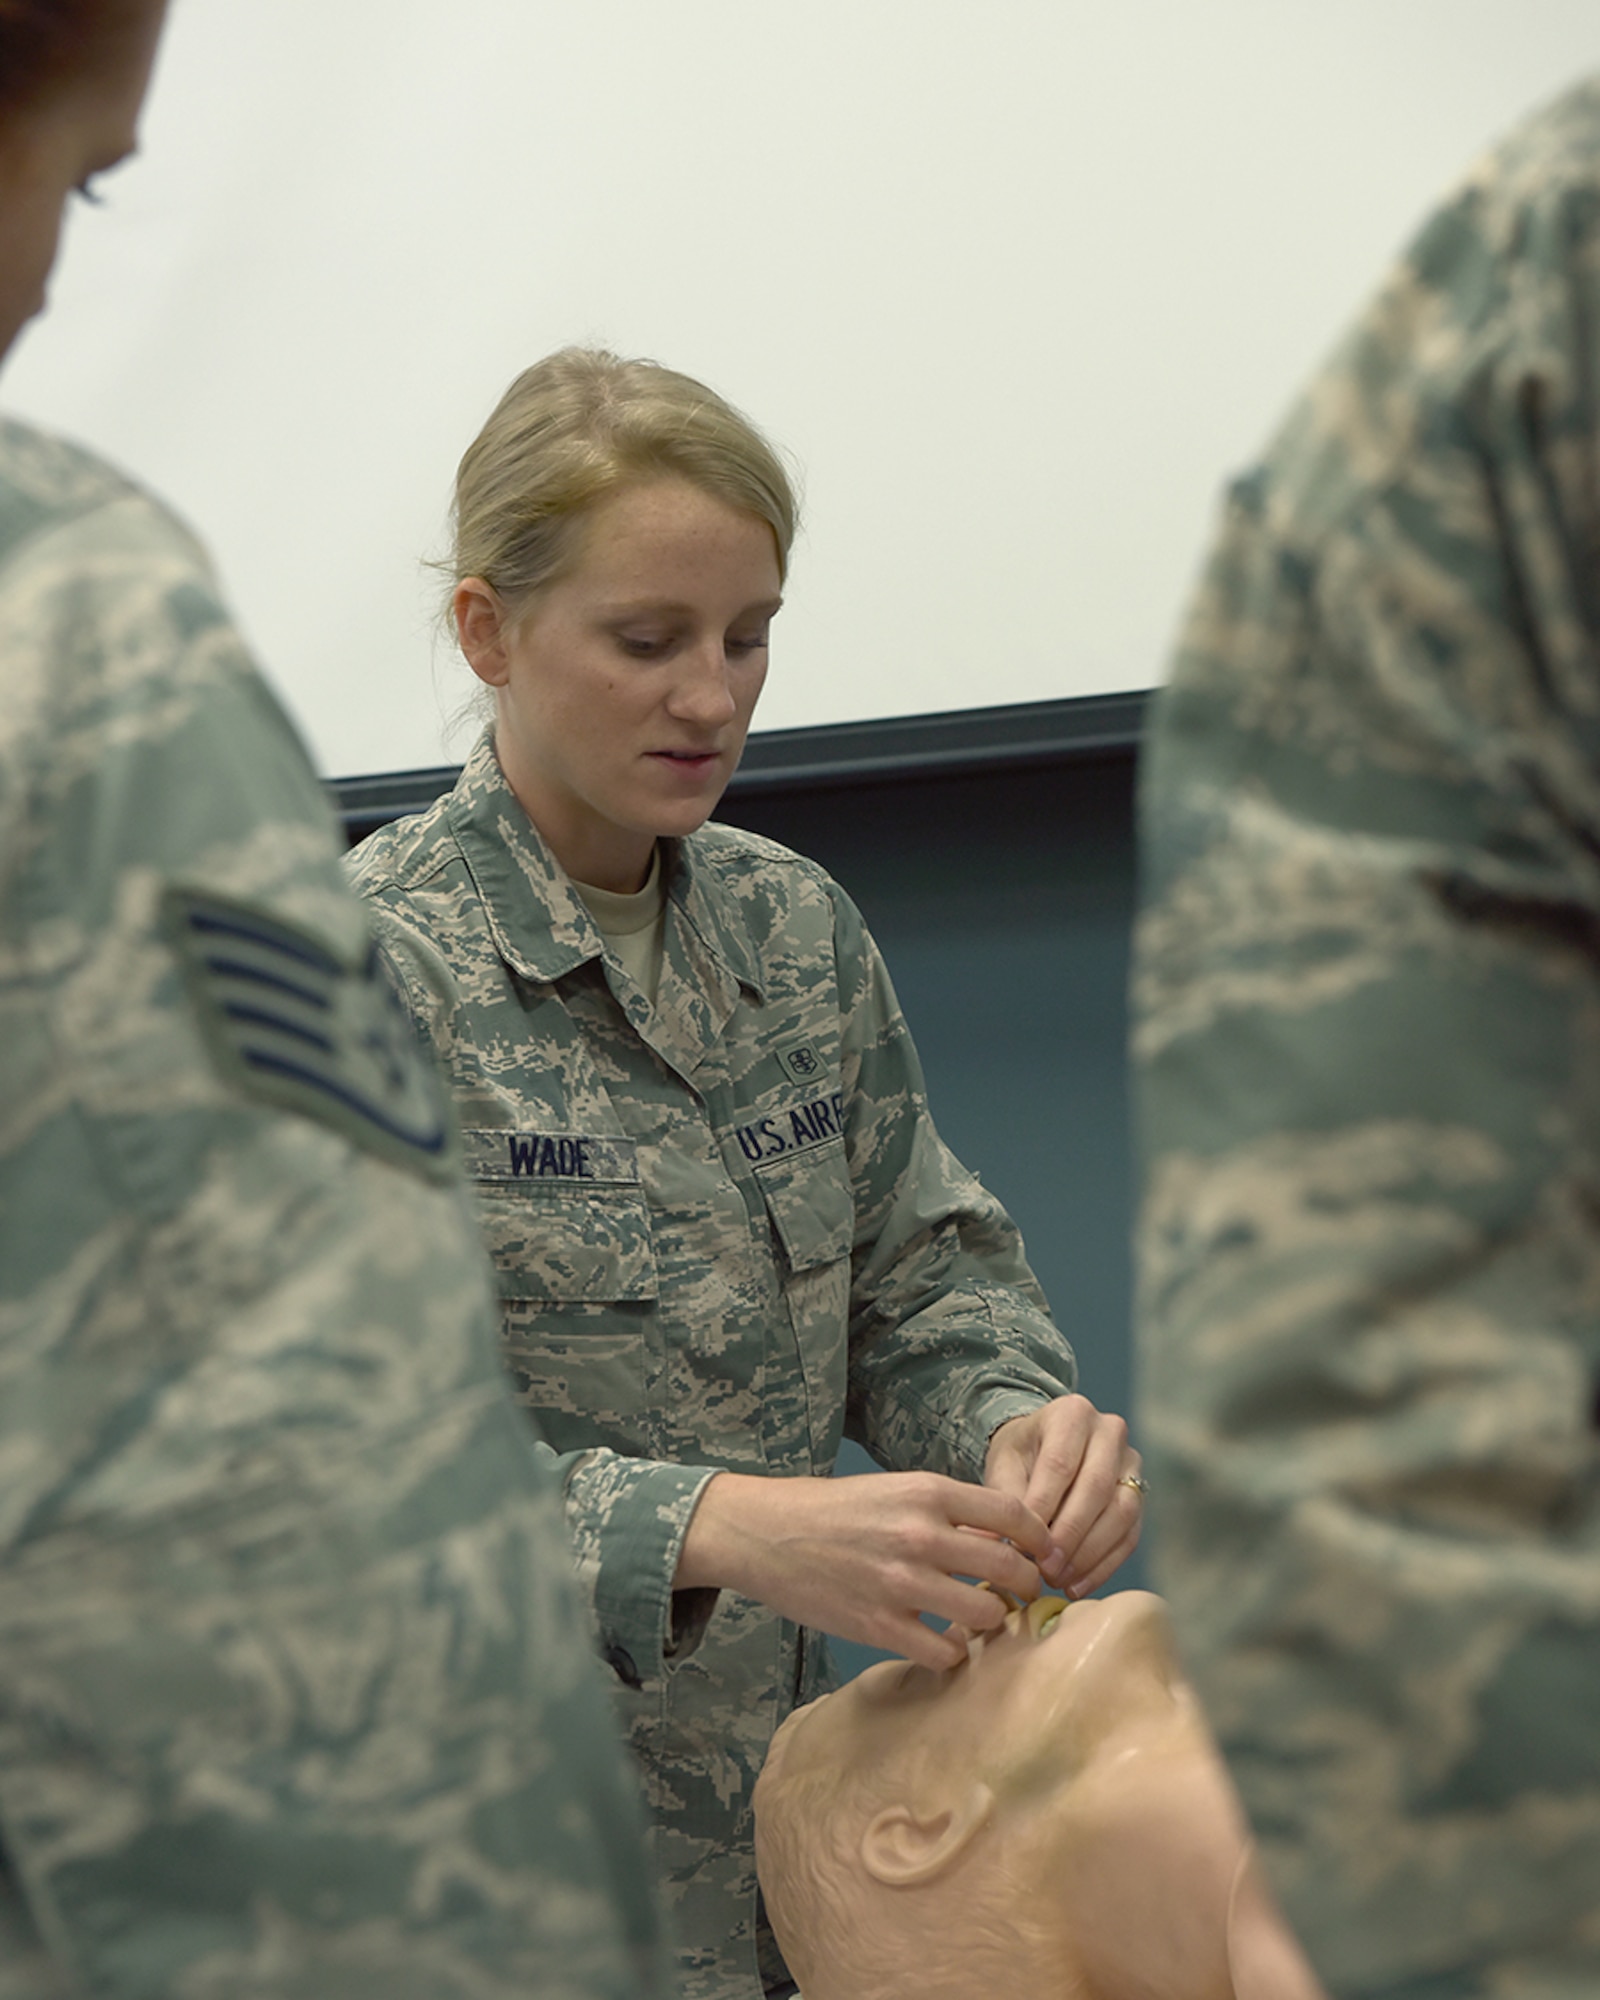 Ohio Air National Guard Senior Airman Katie Wade, 178th Medical Group, teaches a class on airway management during Self-Aid Buddy Care June 6, 2016, at Alpena Combat Readiness Training Center, Alpena Michigan.  Wade taught the SABC course as part of an annual training rodeo for the 178th Force Support Squadron during the 178th Wing annual training. (Ohio Air National Guard Photo by Master Sgt. Seth Skidmore)